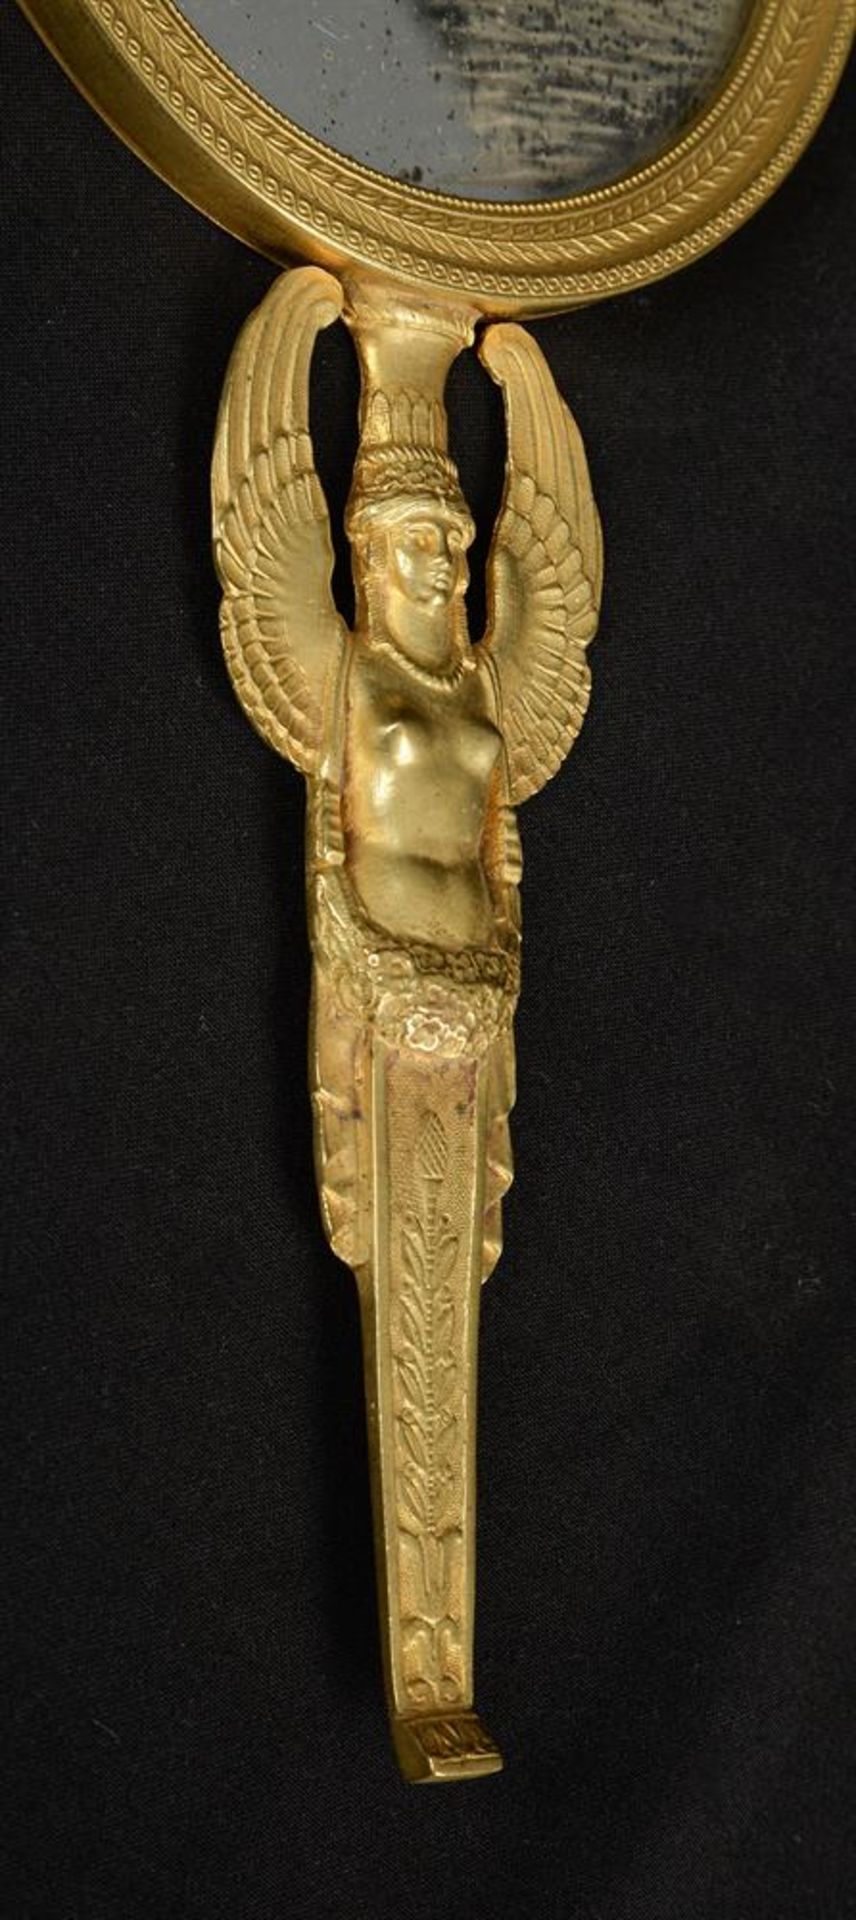 A GILT BRONZE HAND MIRROR, IN THE EMPIRE EGYPTIAN REVIVAL MANNER, FRENCH, 19TH CENTURY - Image 5 of 6